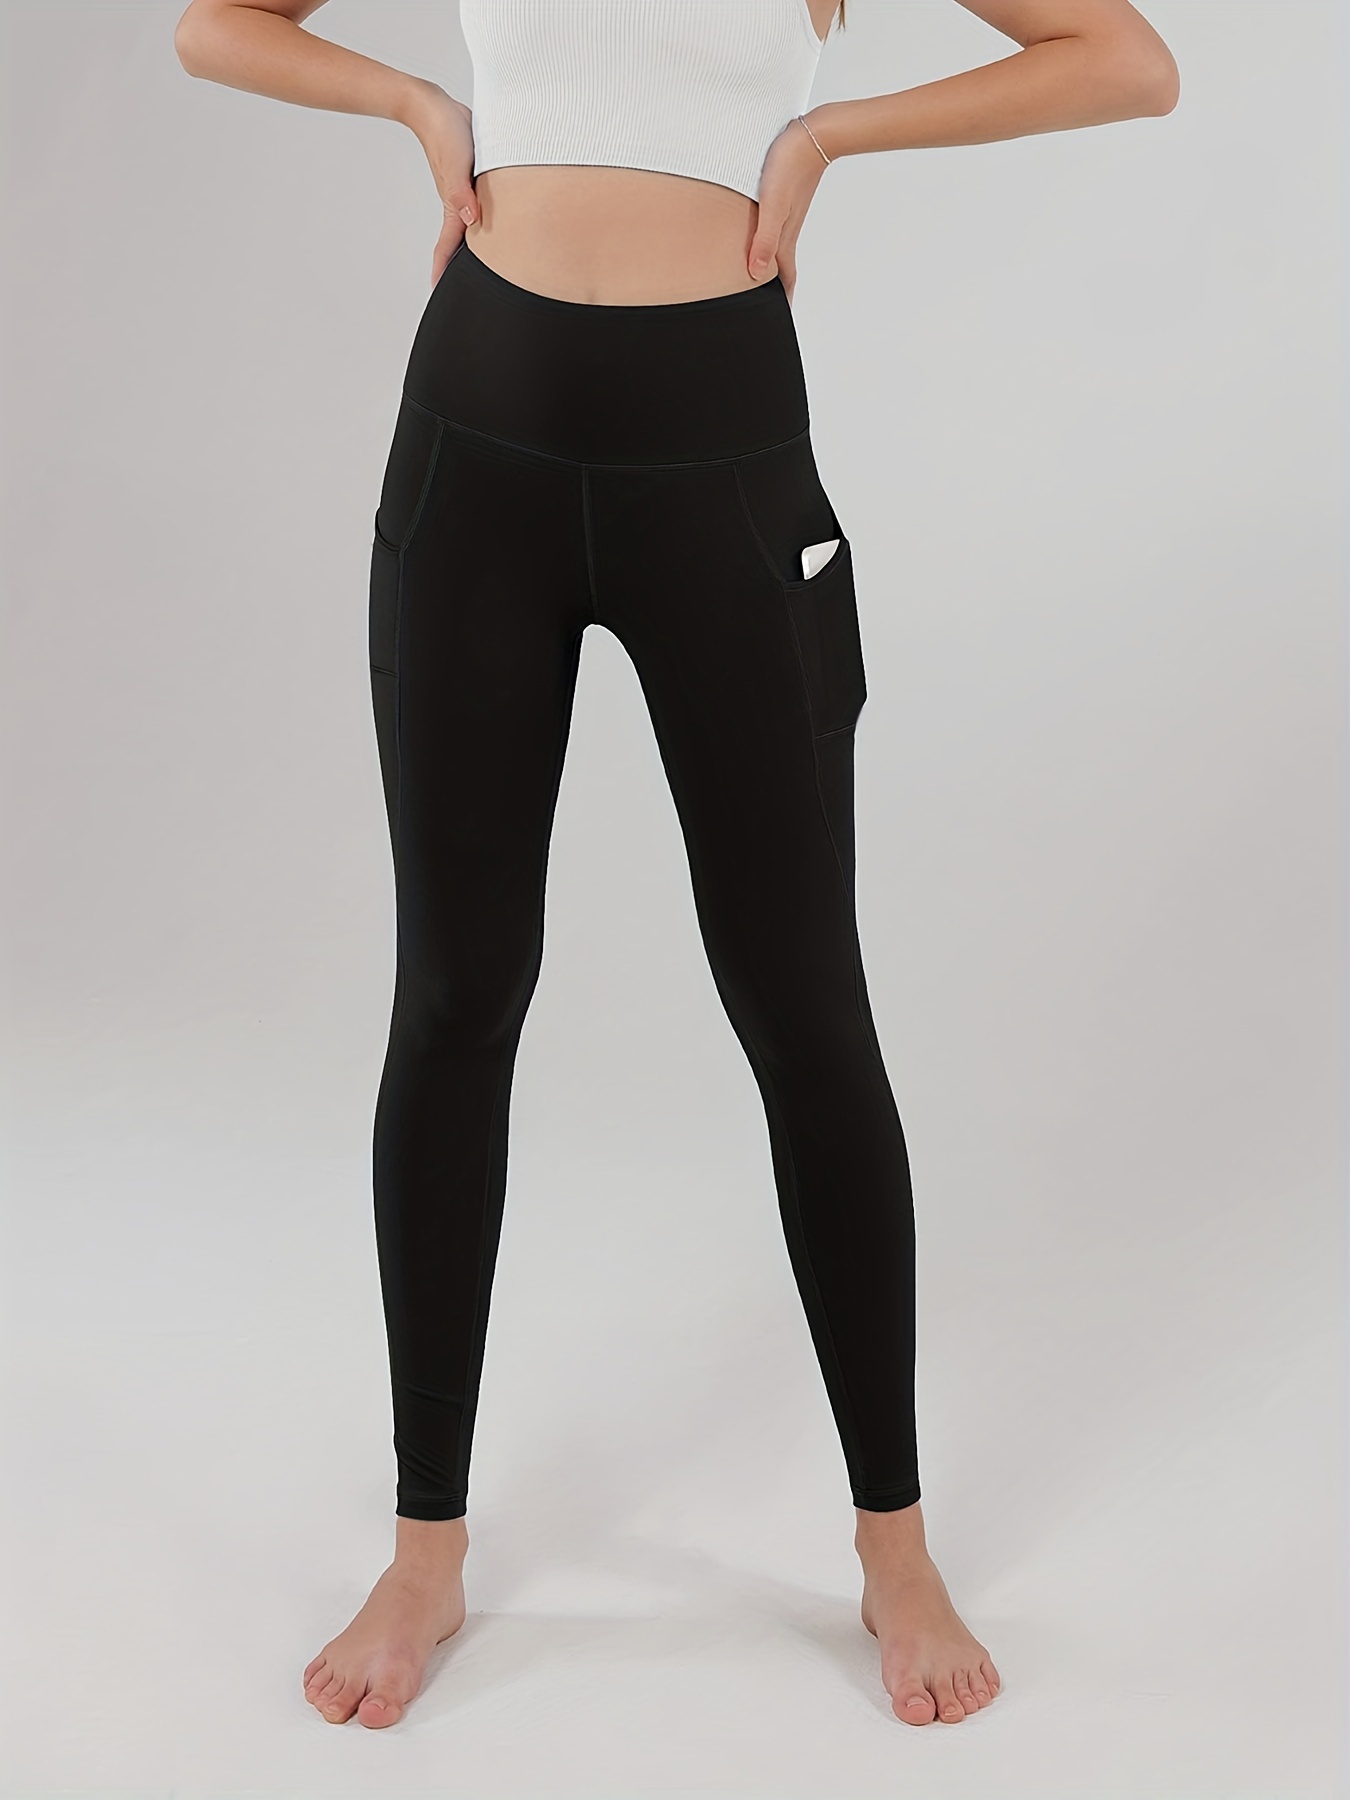  Cerburny High Waisted Exercise Yoga Pants with Pockets